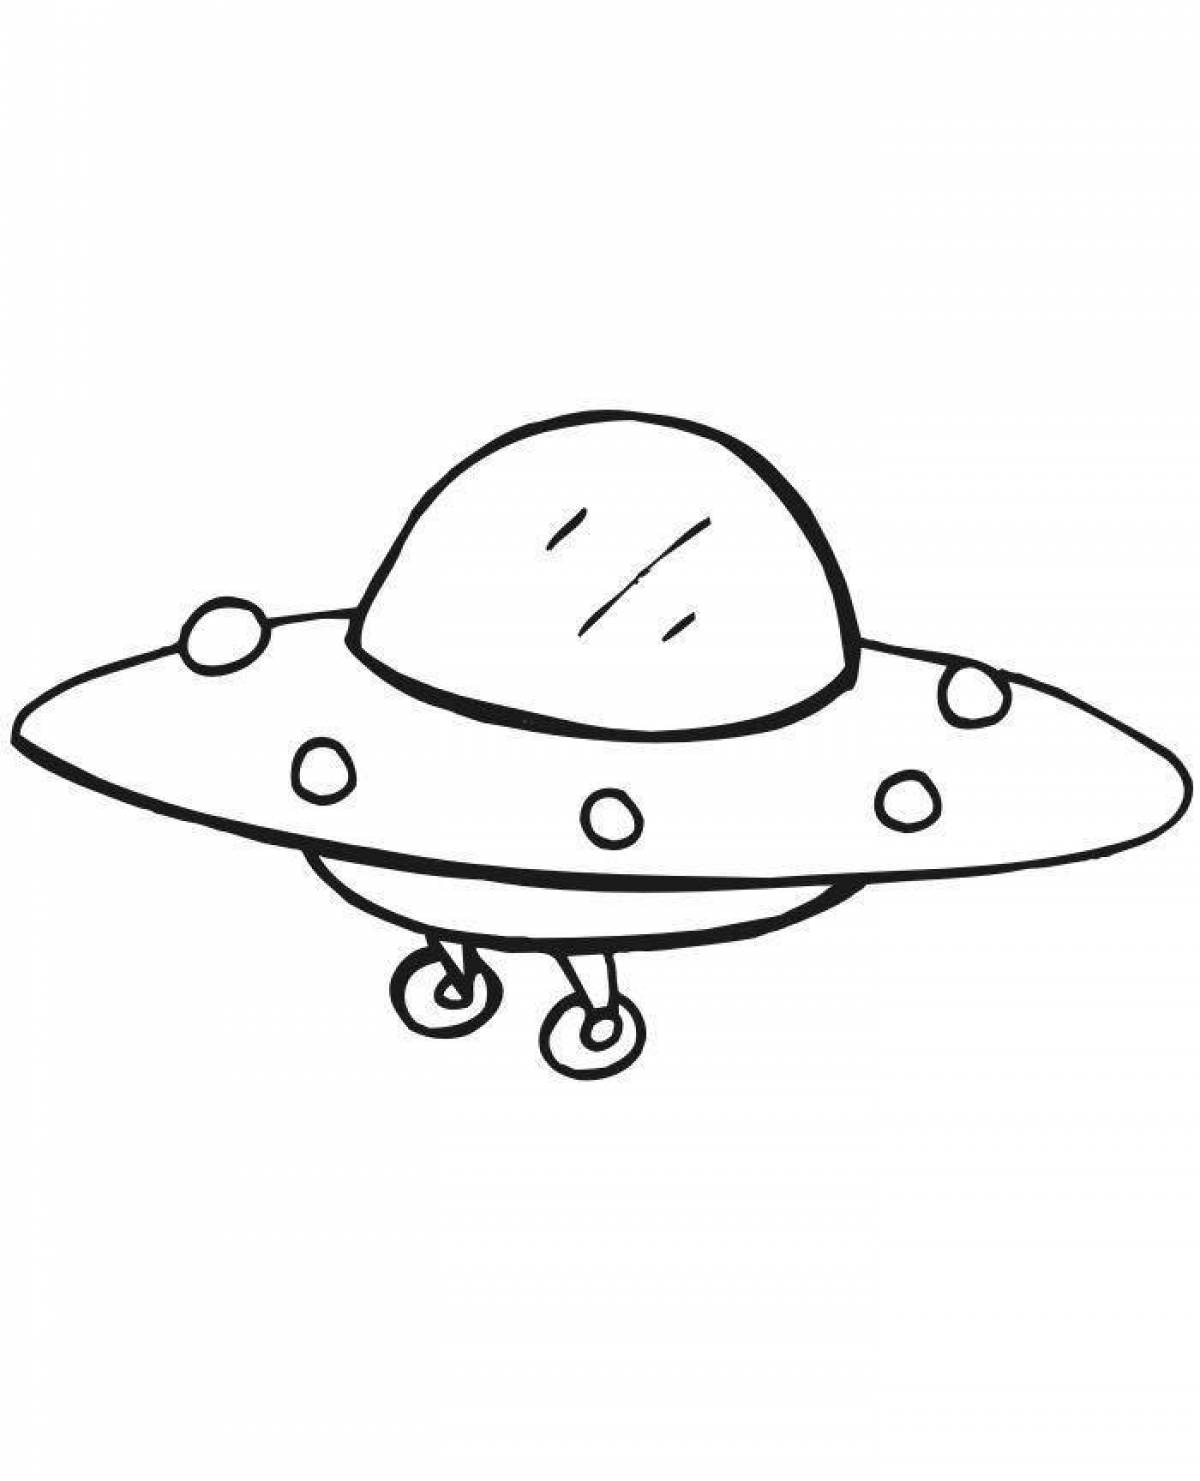 Coloring wonderful flying saucer